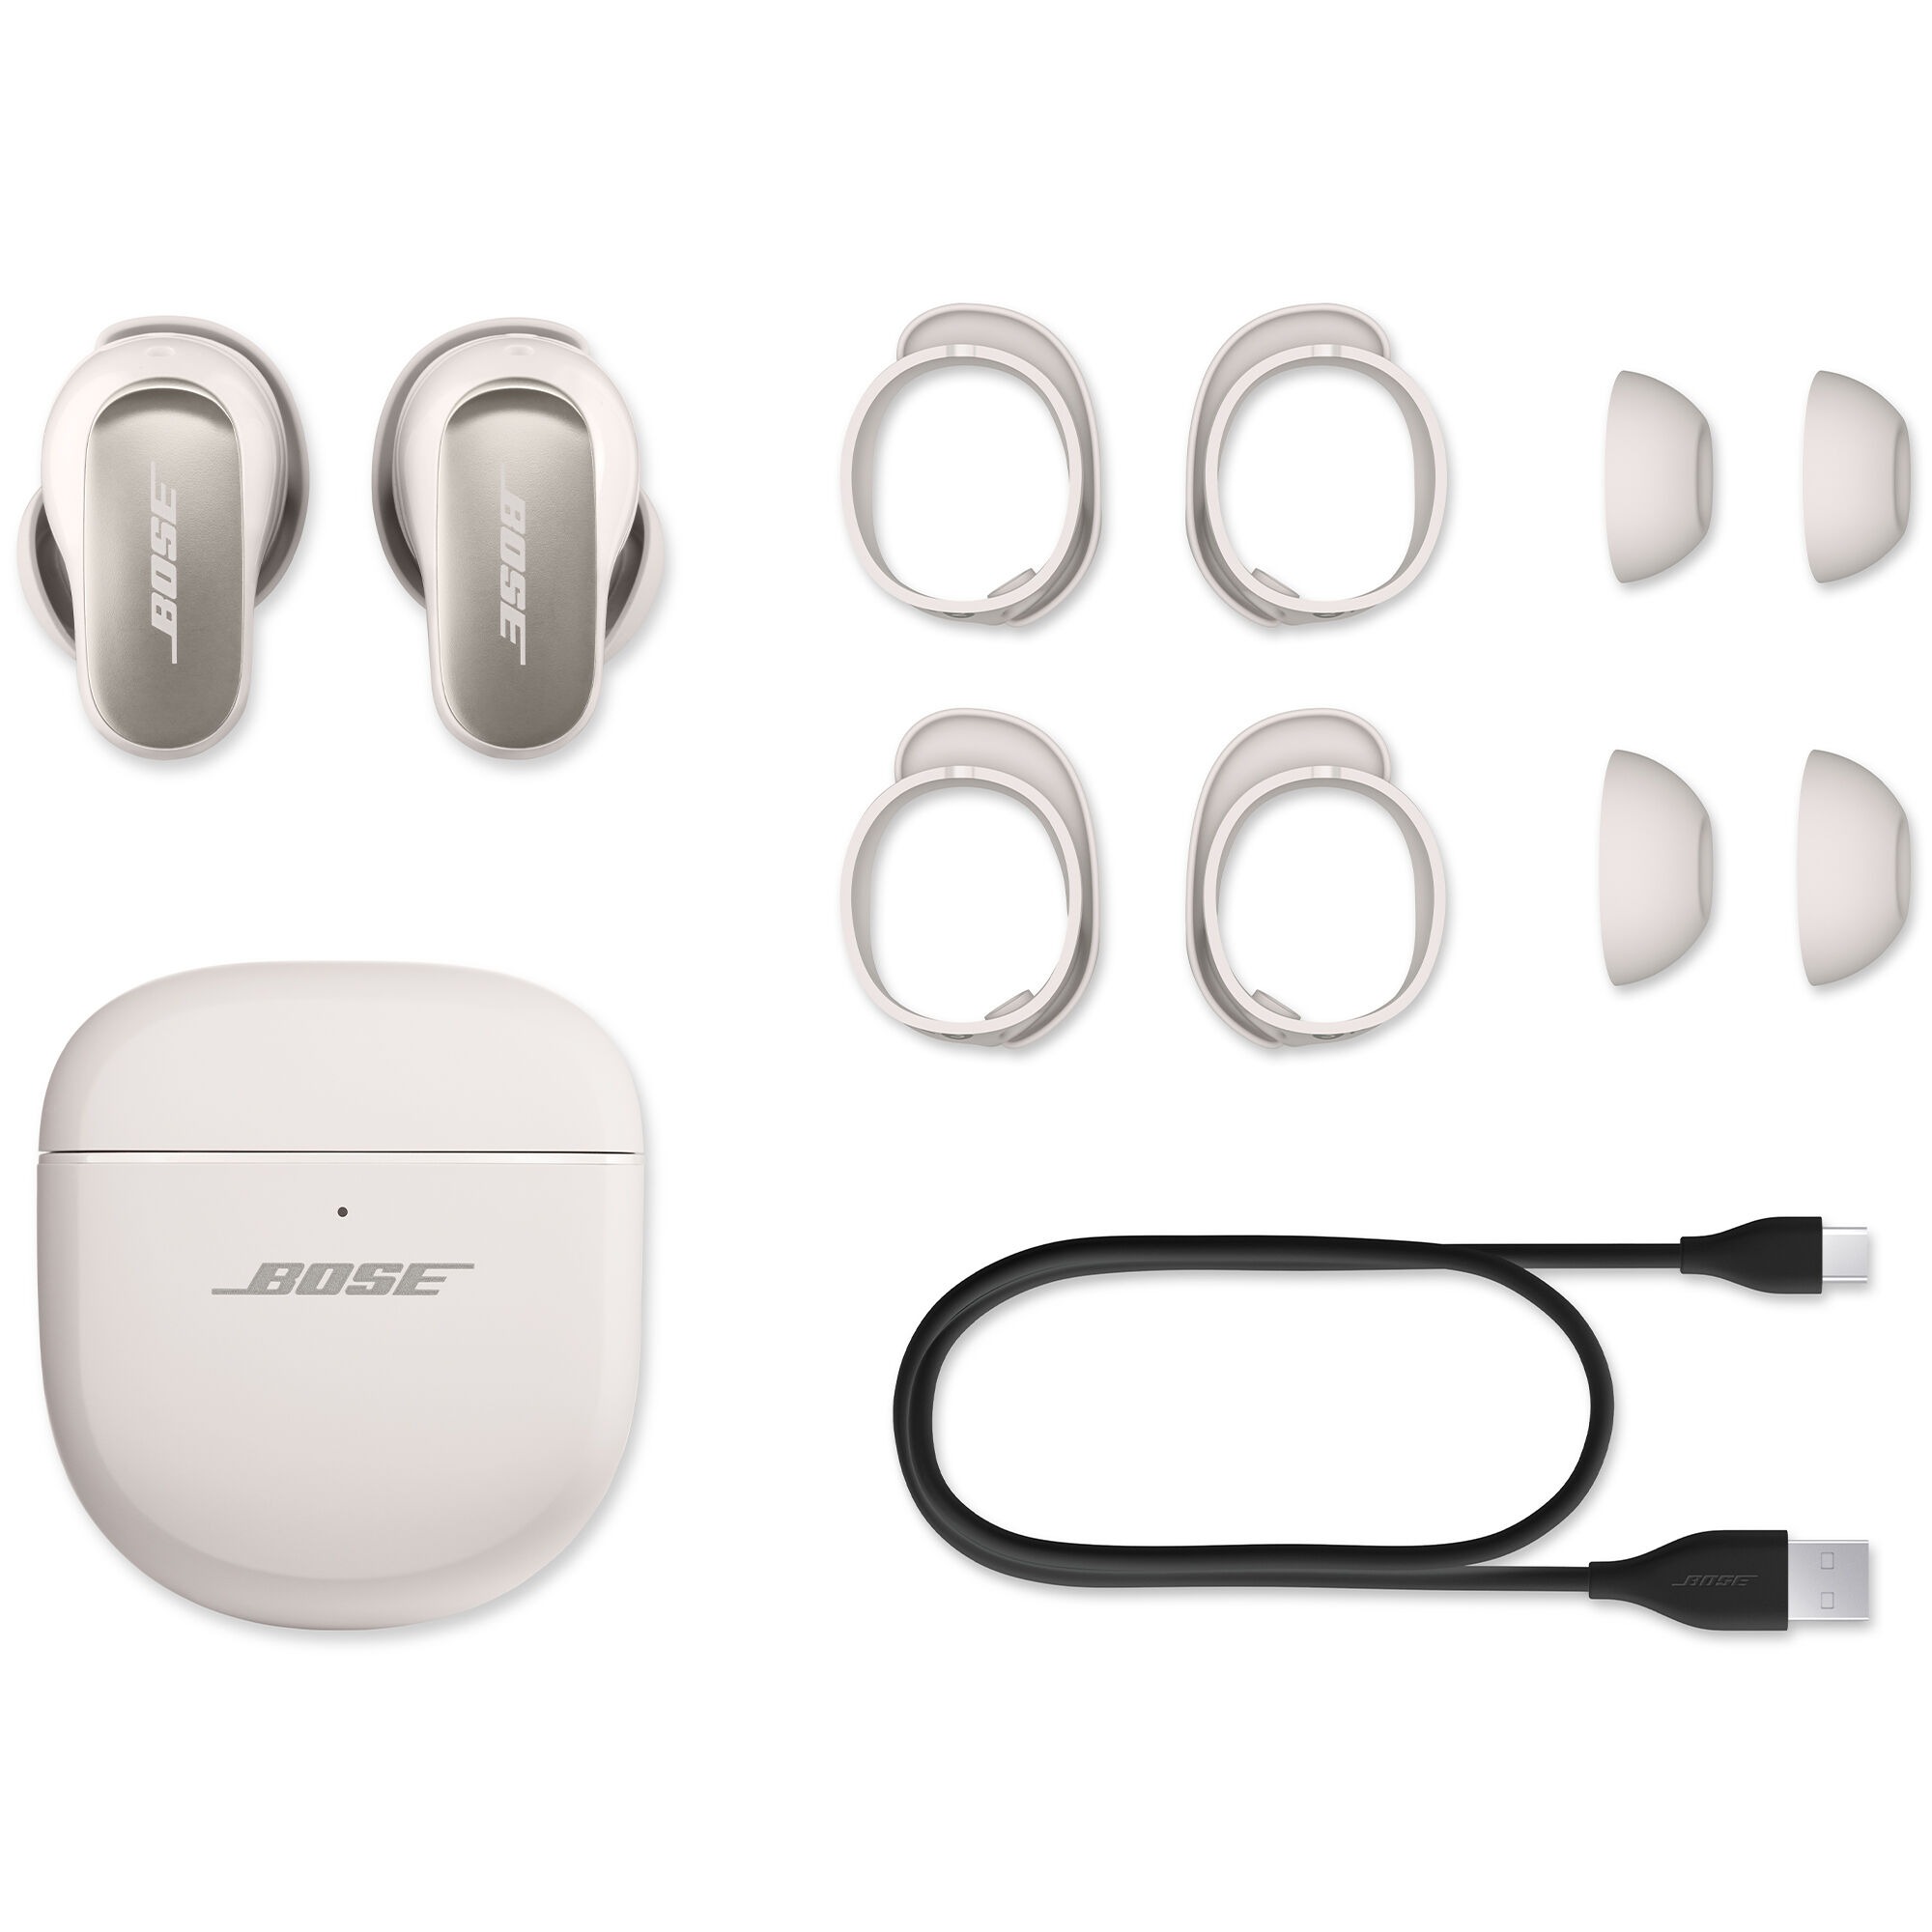 New Bose Quiet Comfort Ultra Earbuds - White | P.C. Richard & Son